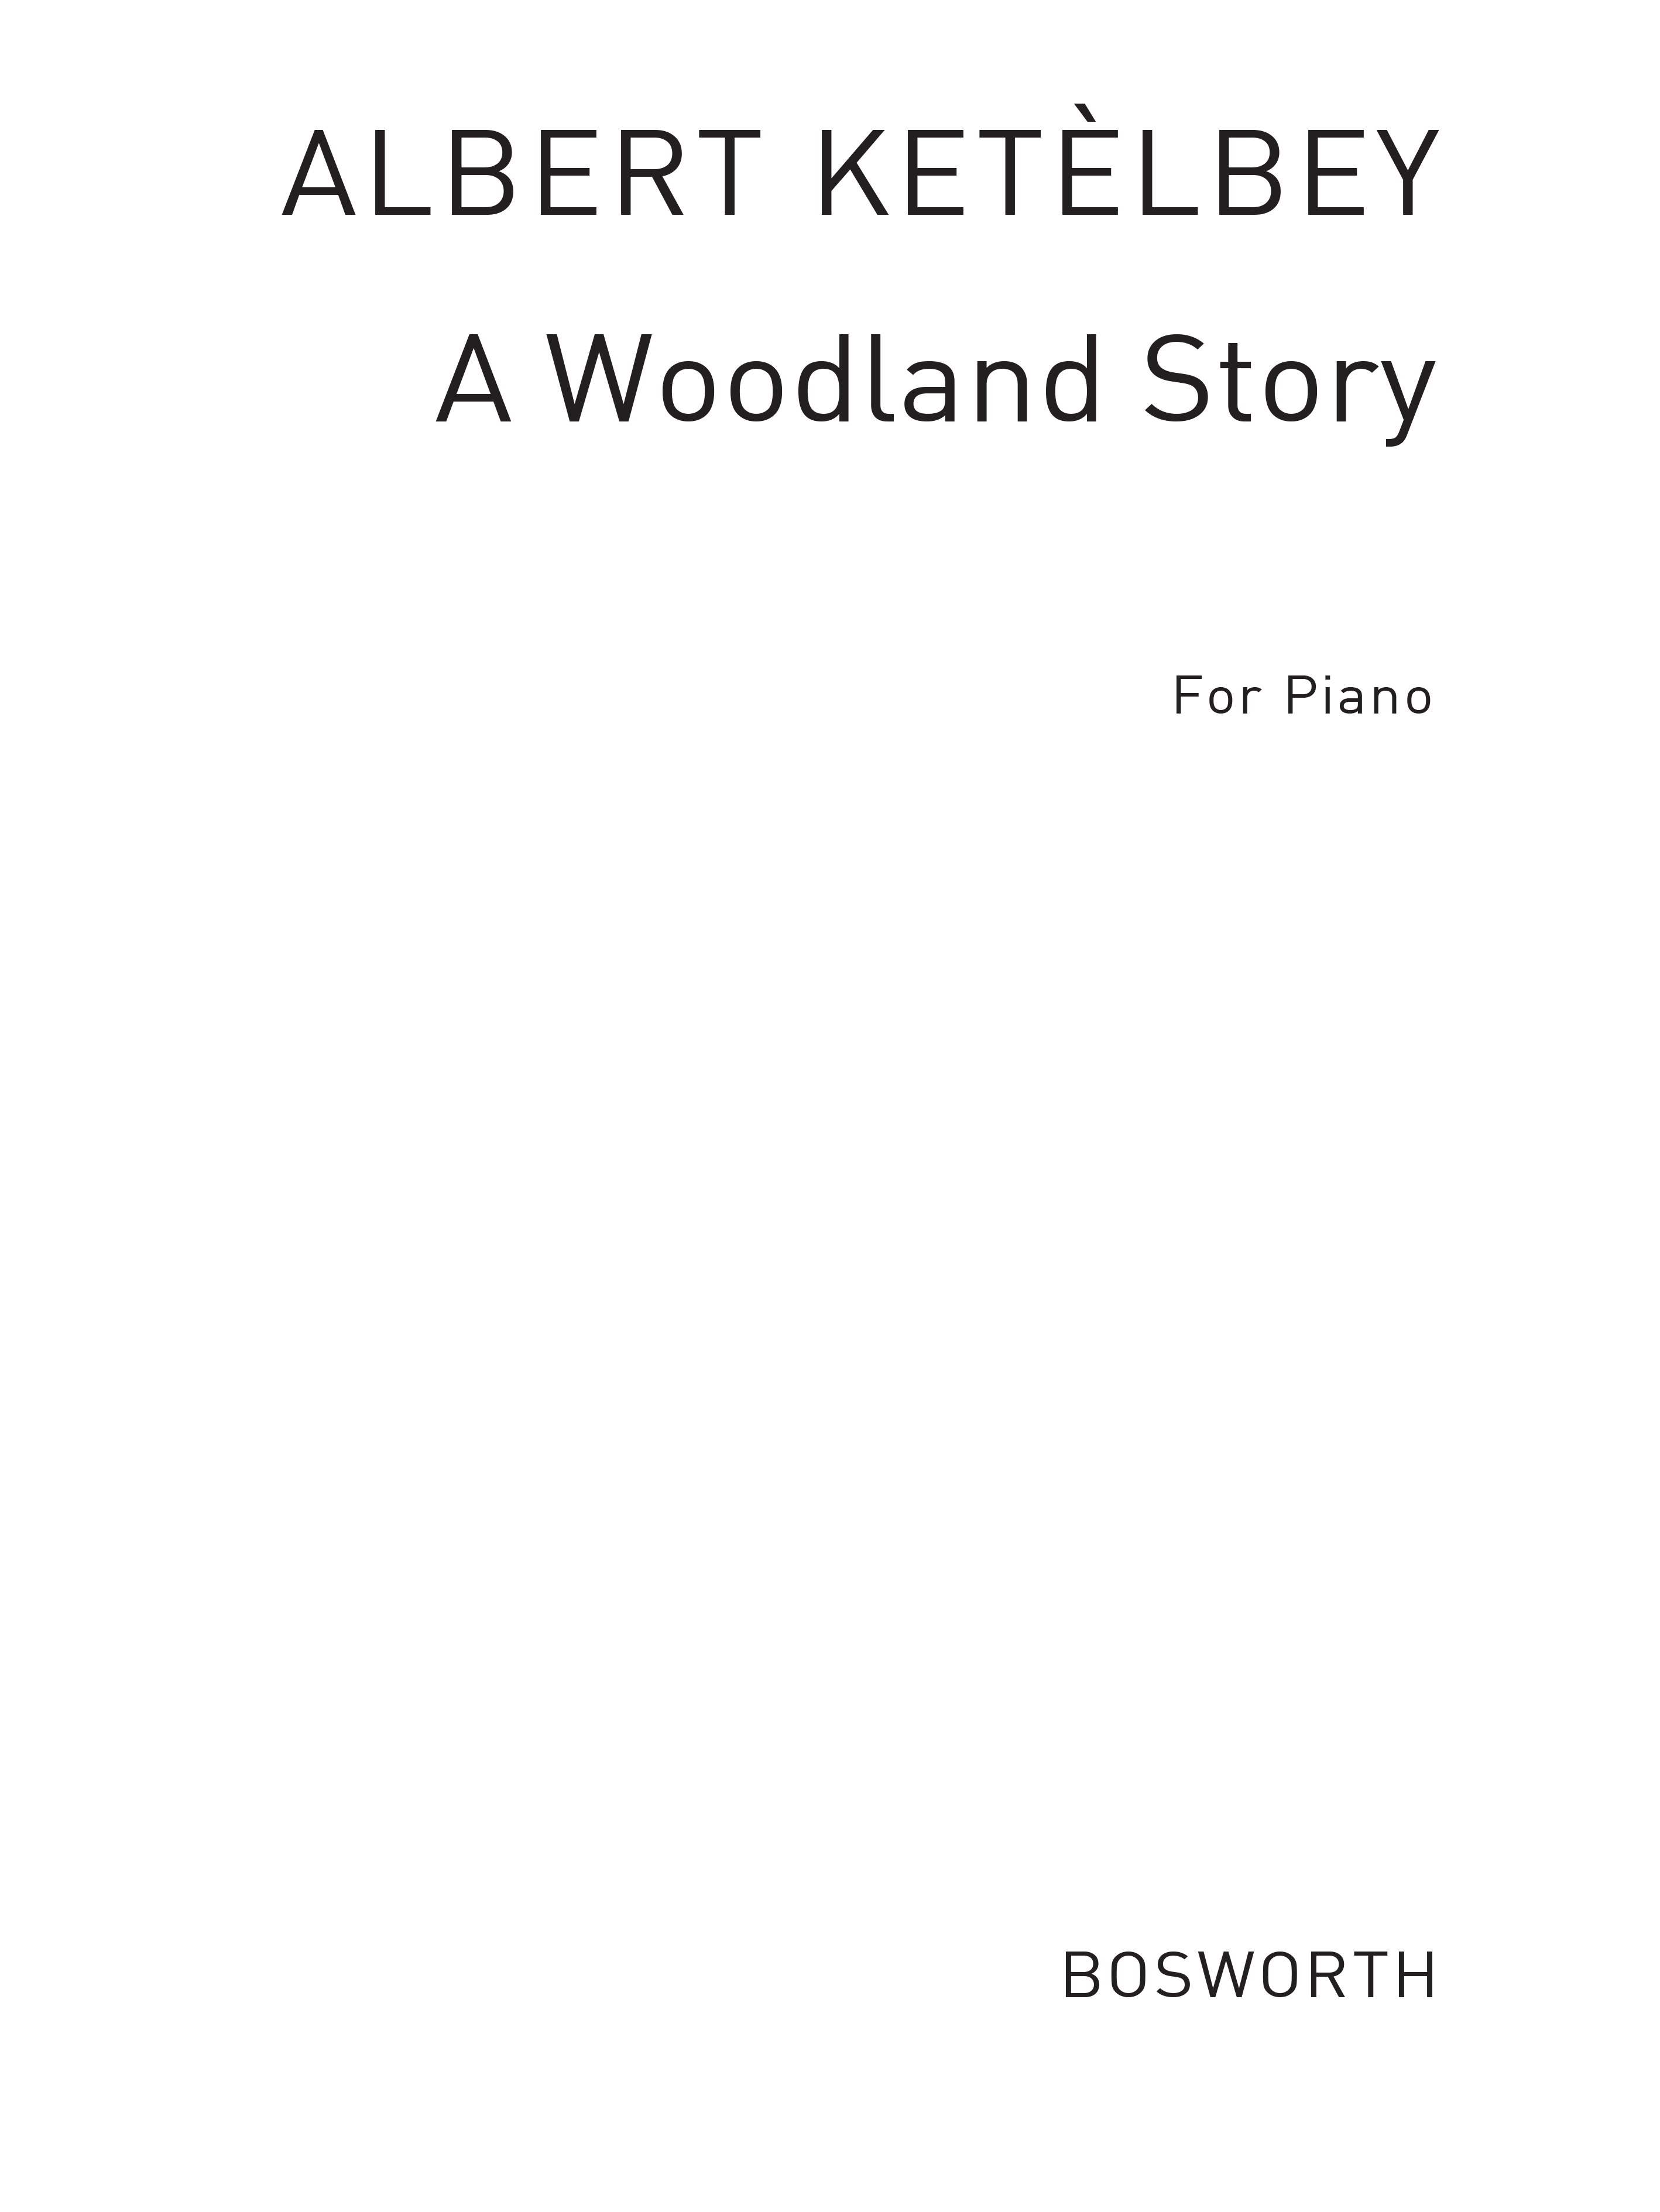 Albert Ketlbey: A Woodland Story (In Eight Chapters)